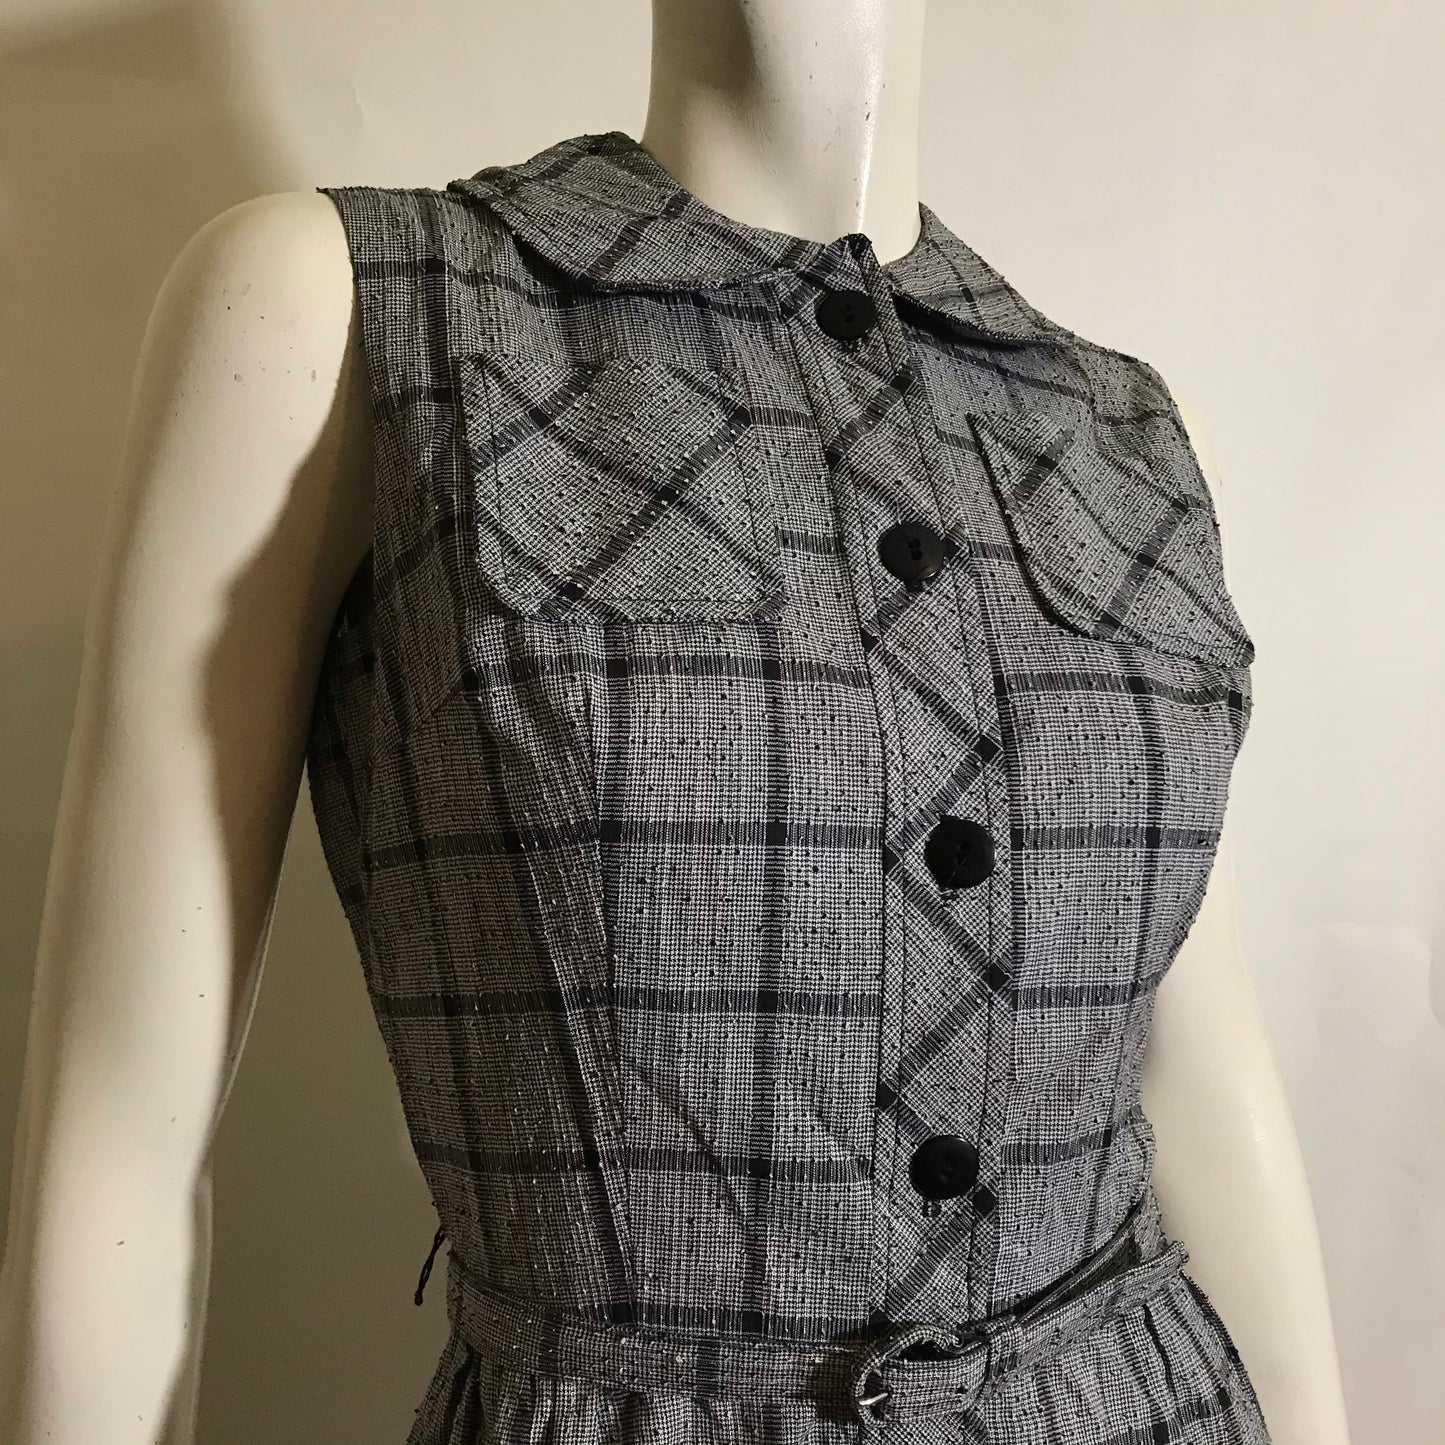 Black and White Textured Weave Cotton Sleeveless Checked Button Up Dress circa 1950s